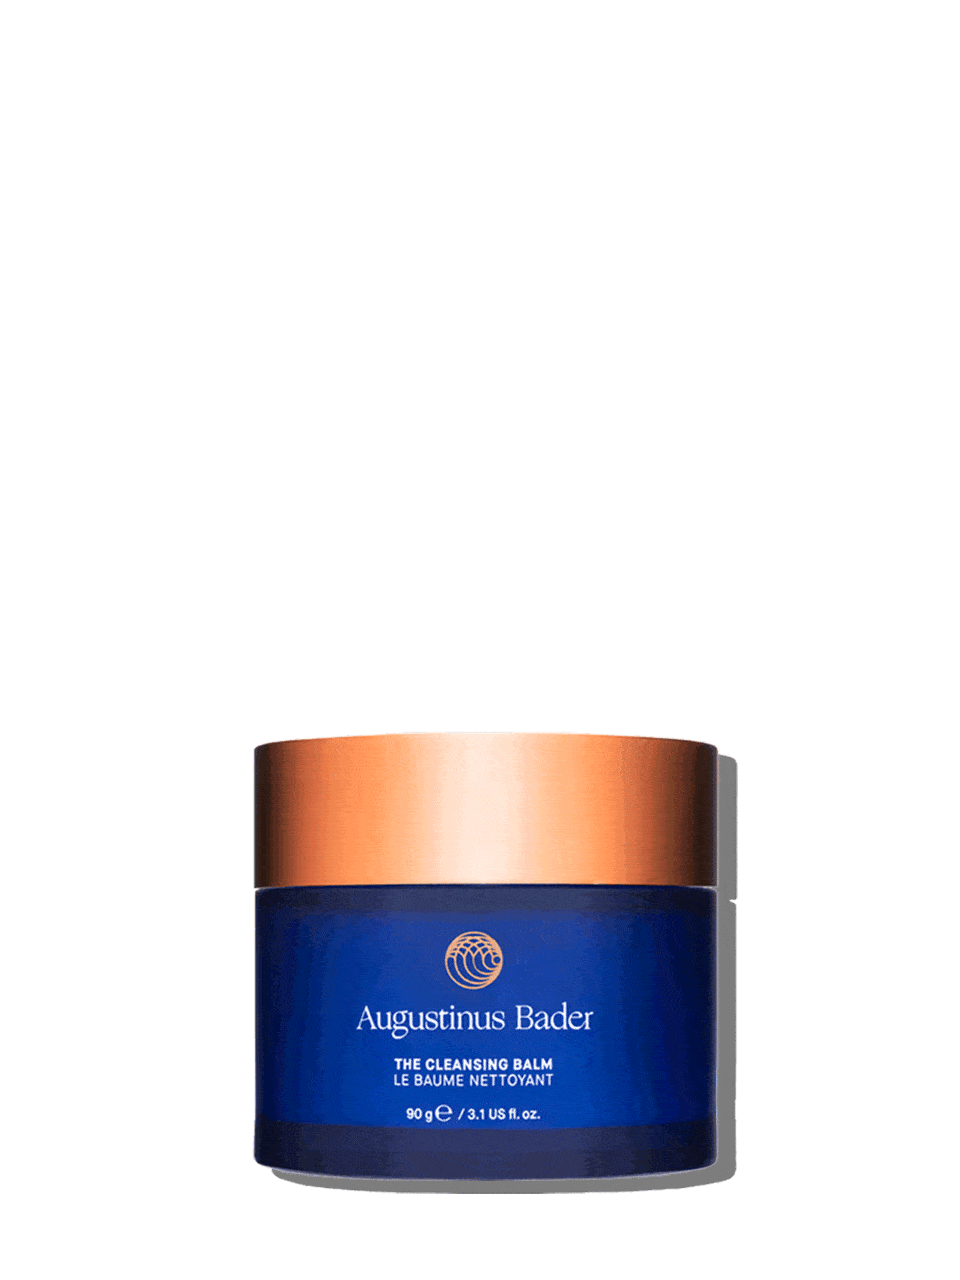 The Cleansing Balm Facial Care Augustinus Bader 